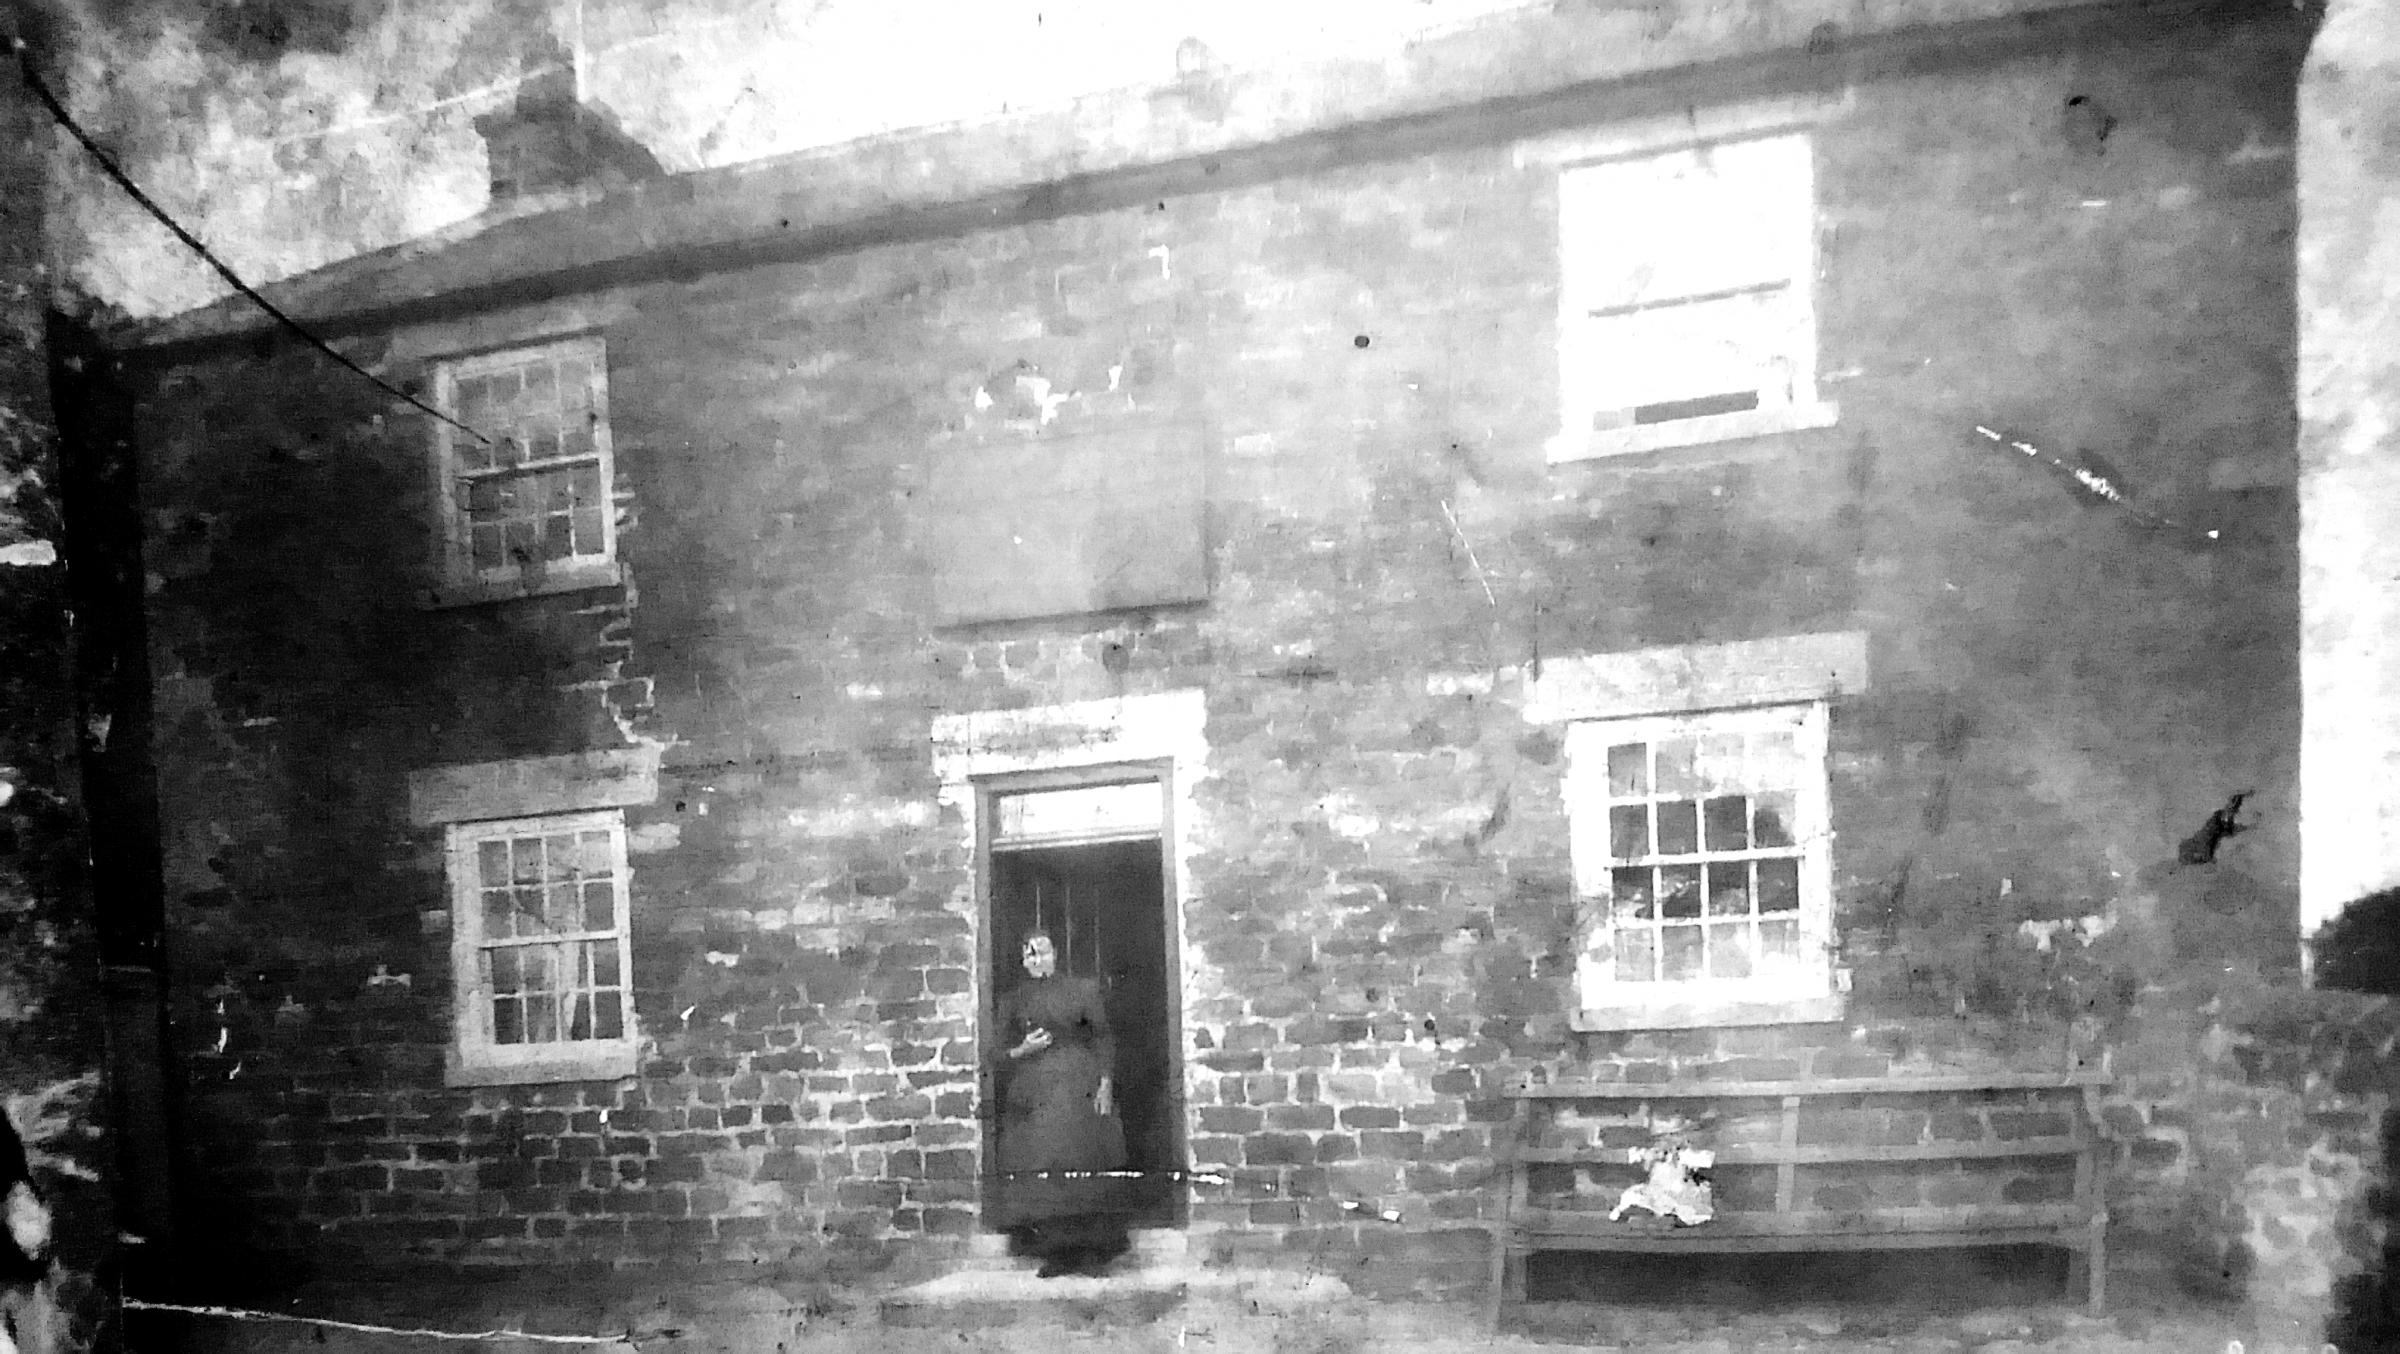 The Holly Hill Inn, Richmond, with Jane Lawson at the door in about 1901